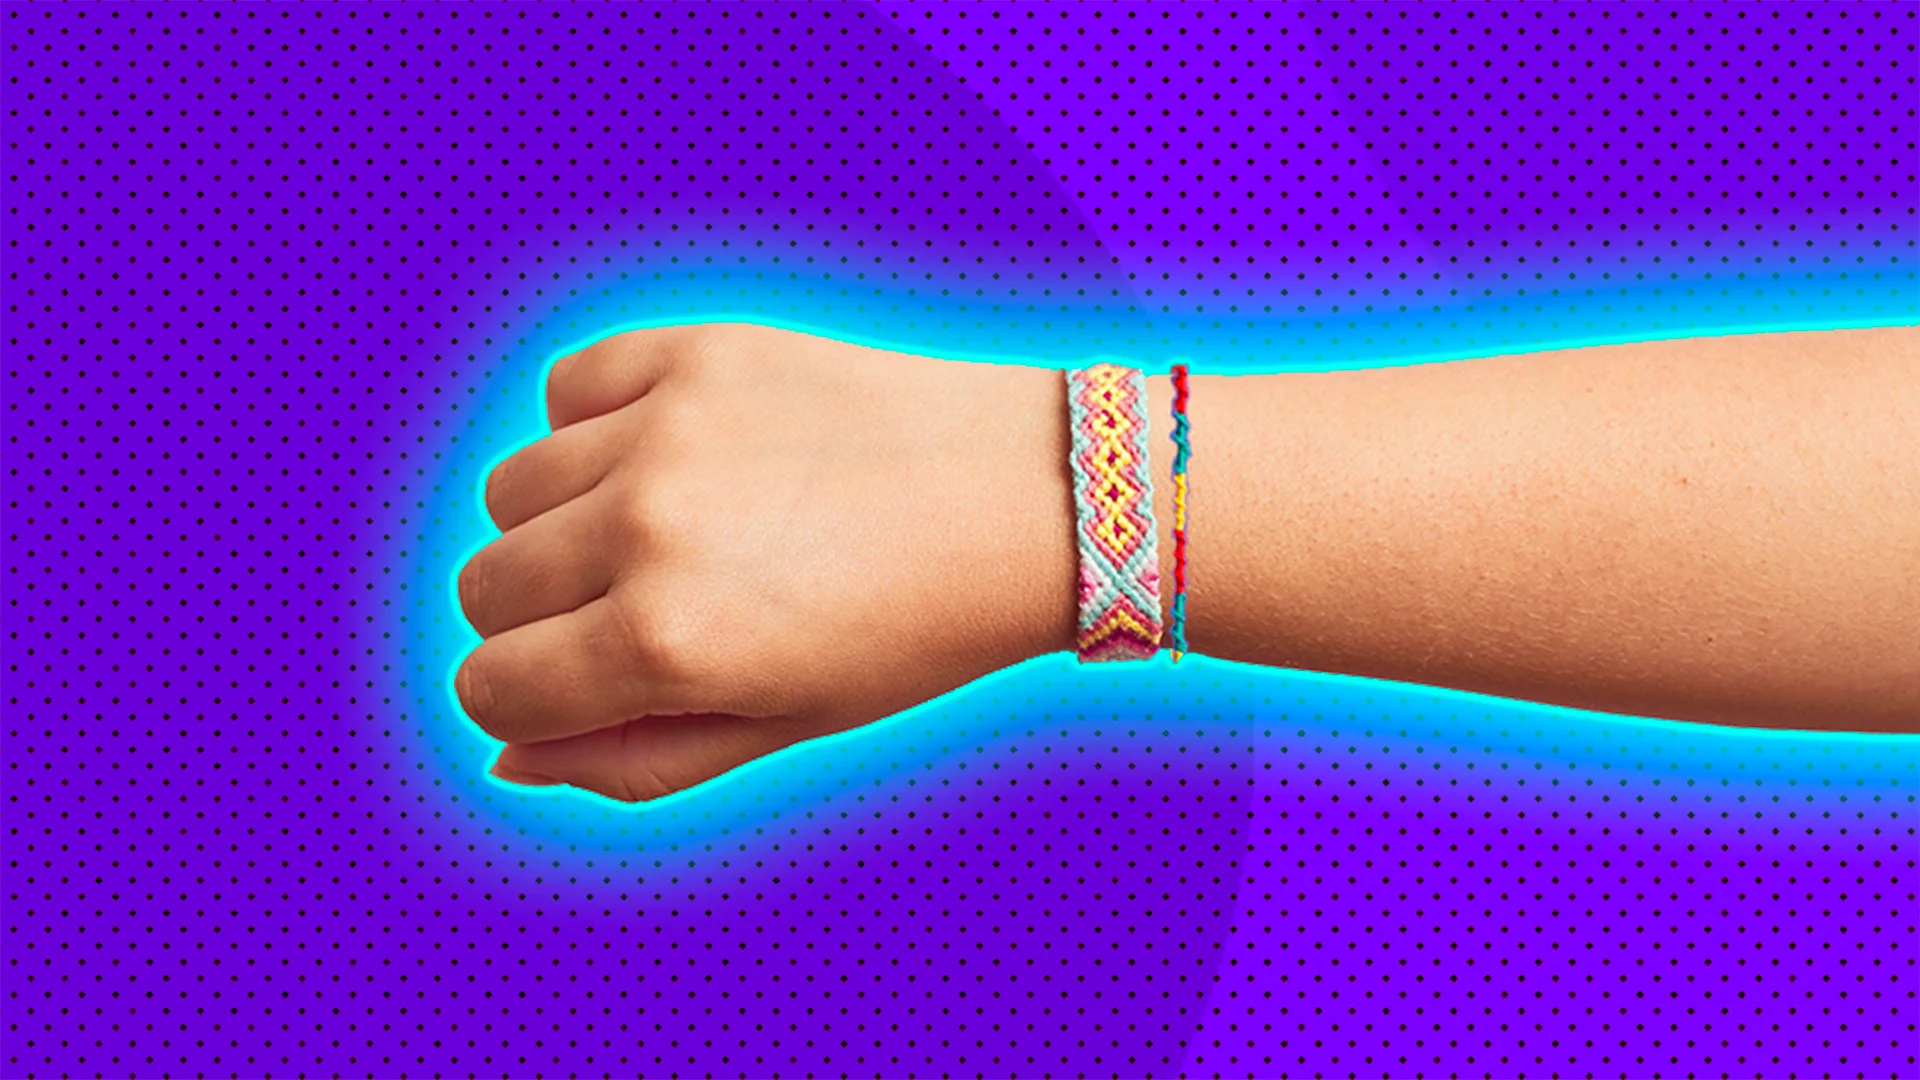 An arm wearing 2 fabric friendship bracelets held out against a purple background